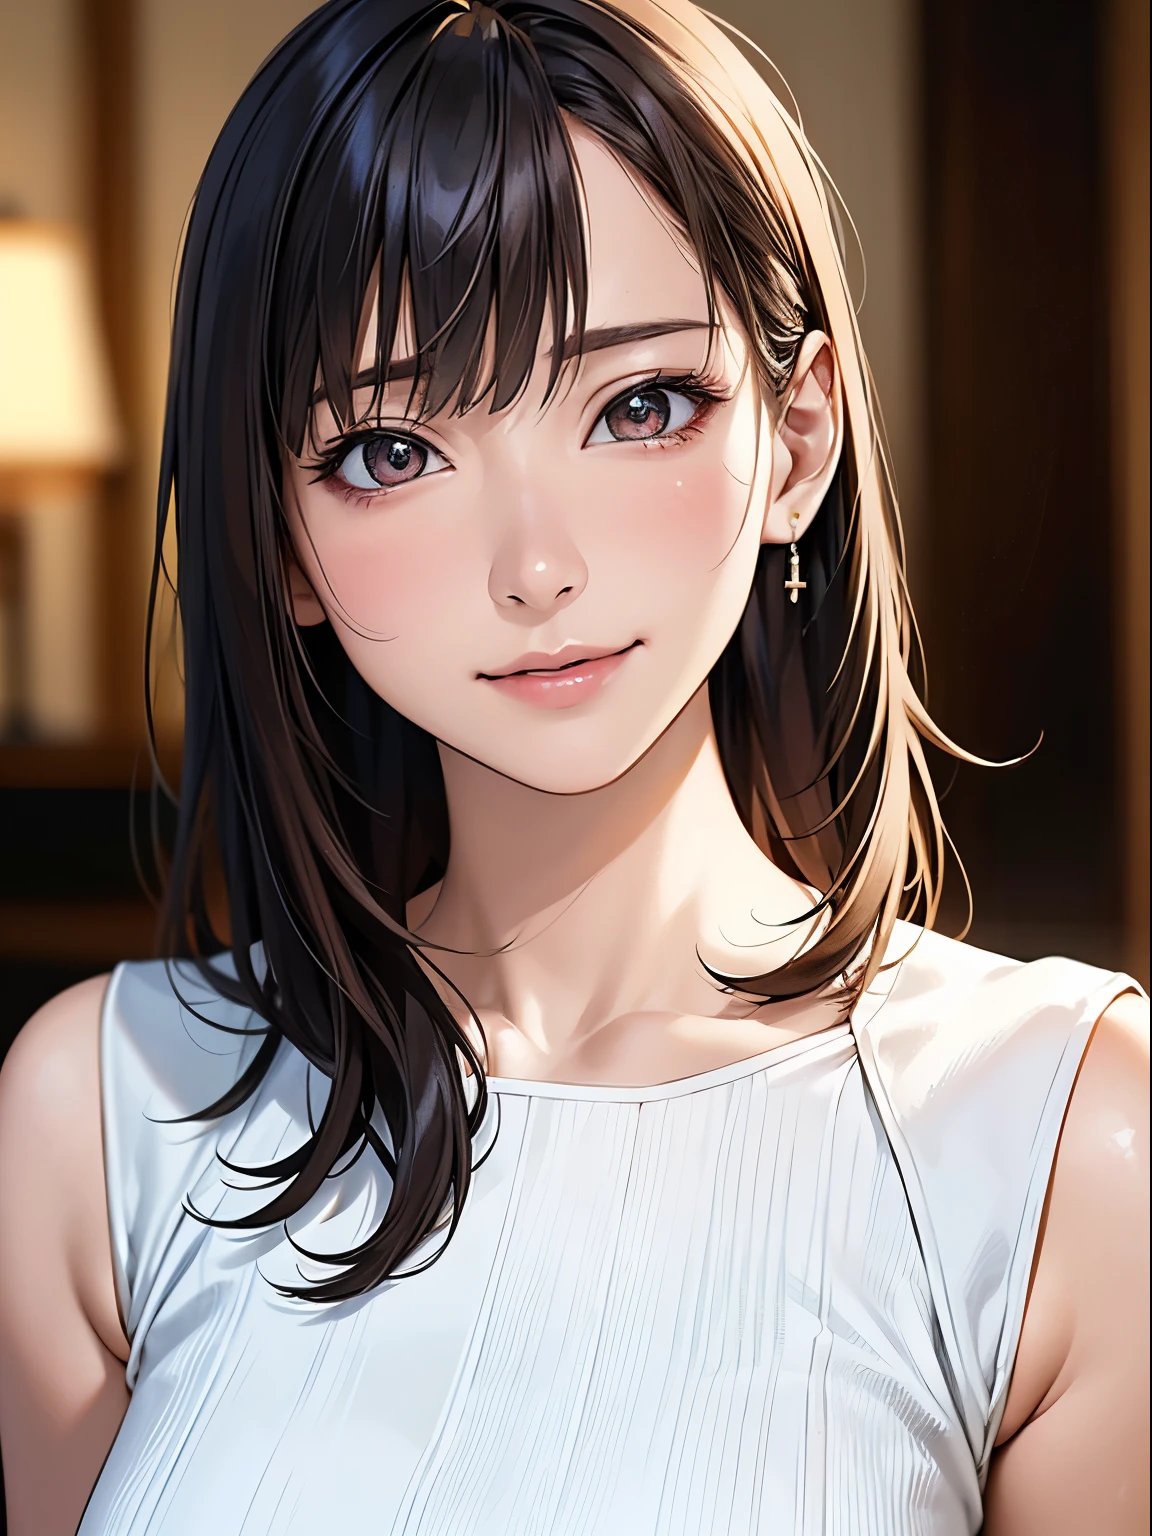 1 Japanese girl, (RAW Photos, highest quality), (Realistic, Realistic:1.4), Tabletop, Very delicate and beautiful, Very detailed, 8k wallpaper, wonderful, In detail, Very detailedなCG Unity, High resolution, Soft Light, Beautiful details 19 years old, Very detailedな目と顔, Beautiful and sophisticated nose, Beautiful details,Cinema Lighting,Perfect Anatomy,Slender body,smile  (Asymmetrical bangs), Beautiful illustrations, (Natural Side Lighting, Cinema Lighting), (Perfect Anatomy:1.4), Cute and symmetrical face, White skin, Shiny skin, (Casual Fashion)